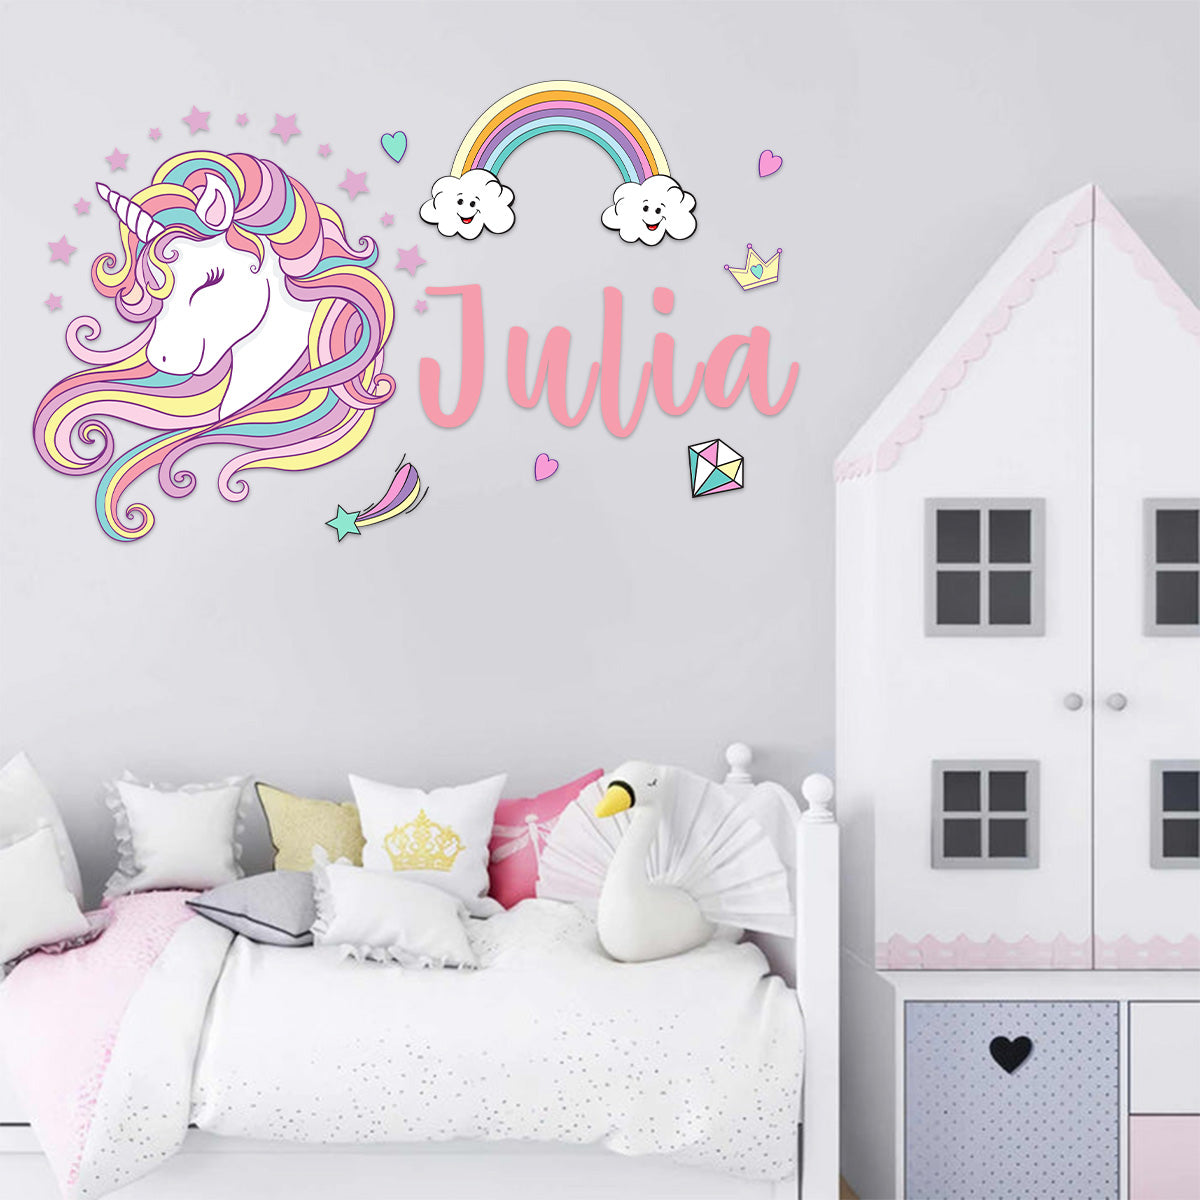 Adorable Unicorn And Rainbow Wall Sticker Decor For Kids' Room - Personalized Decal